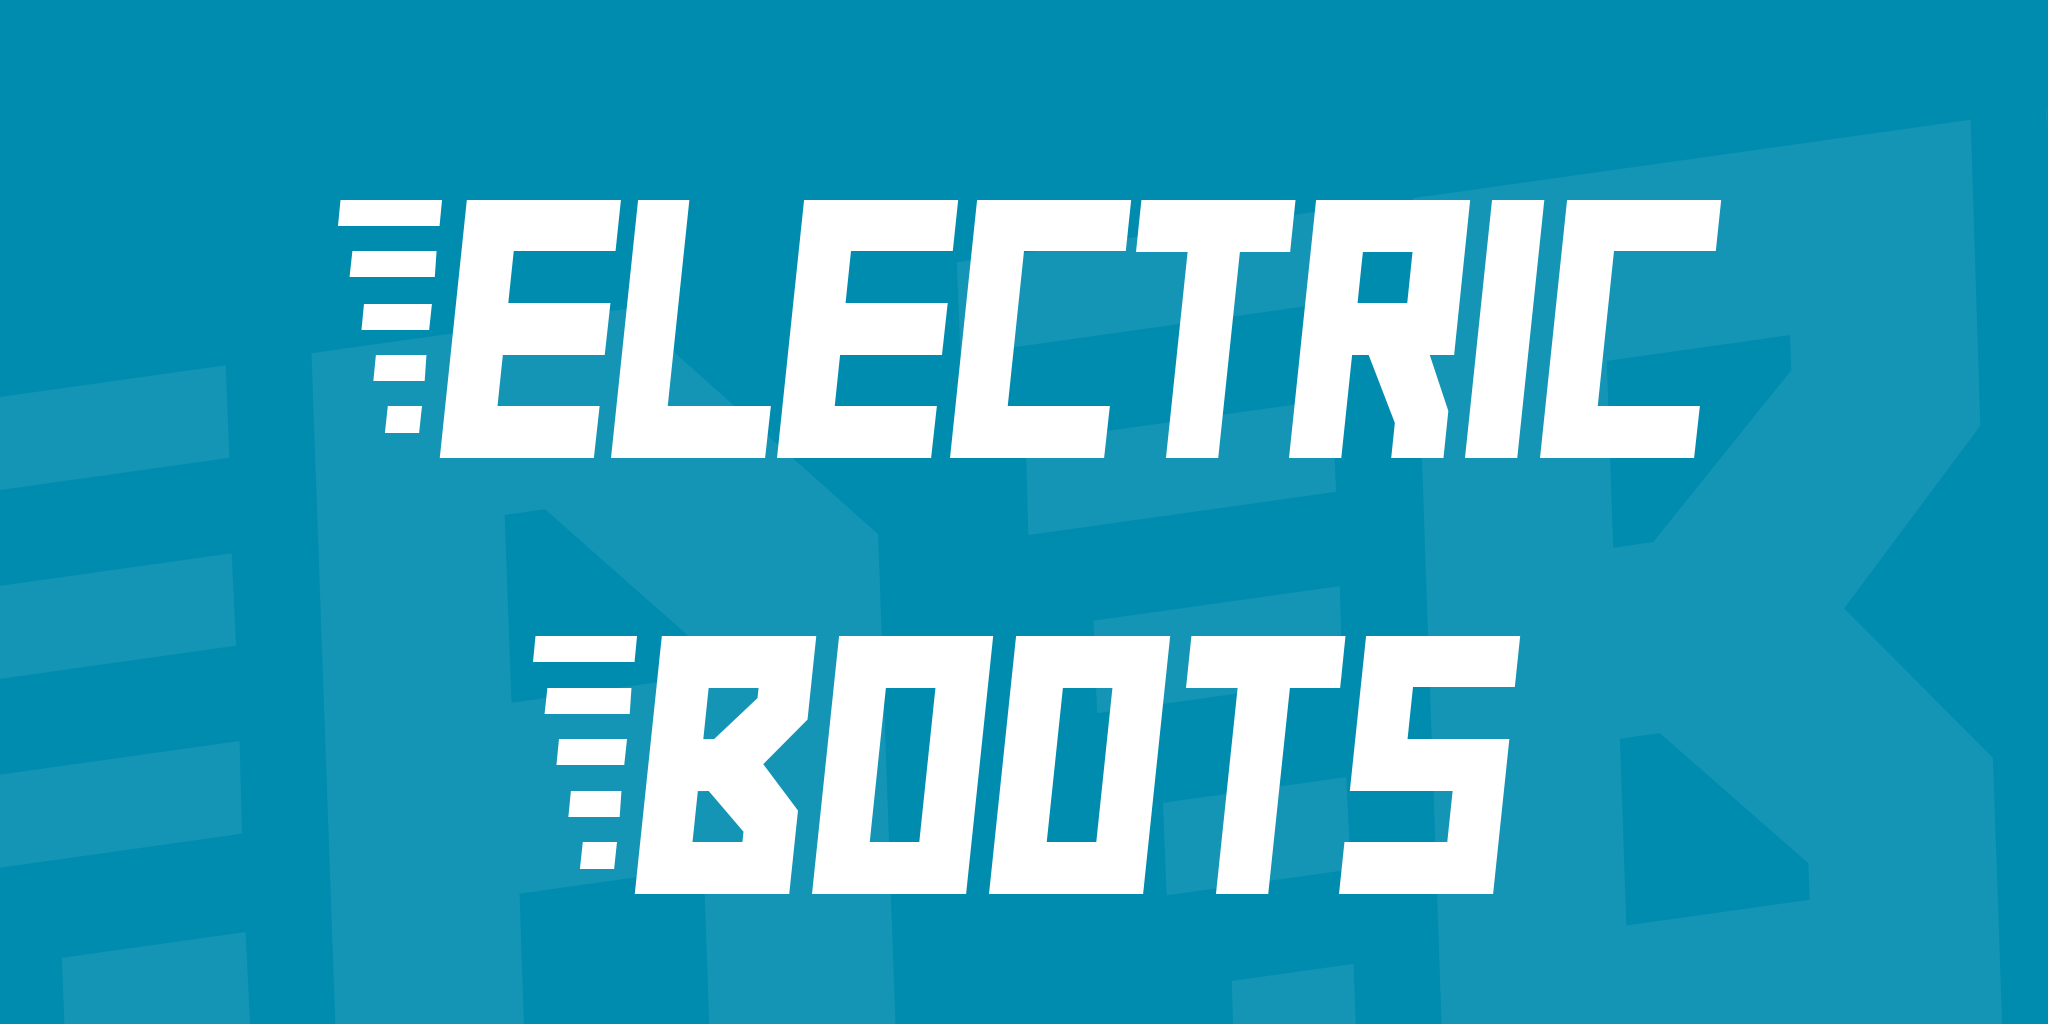 Electric Boots